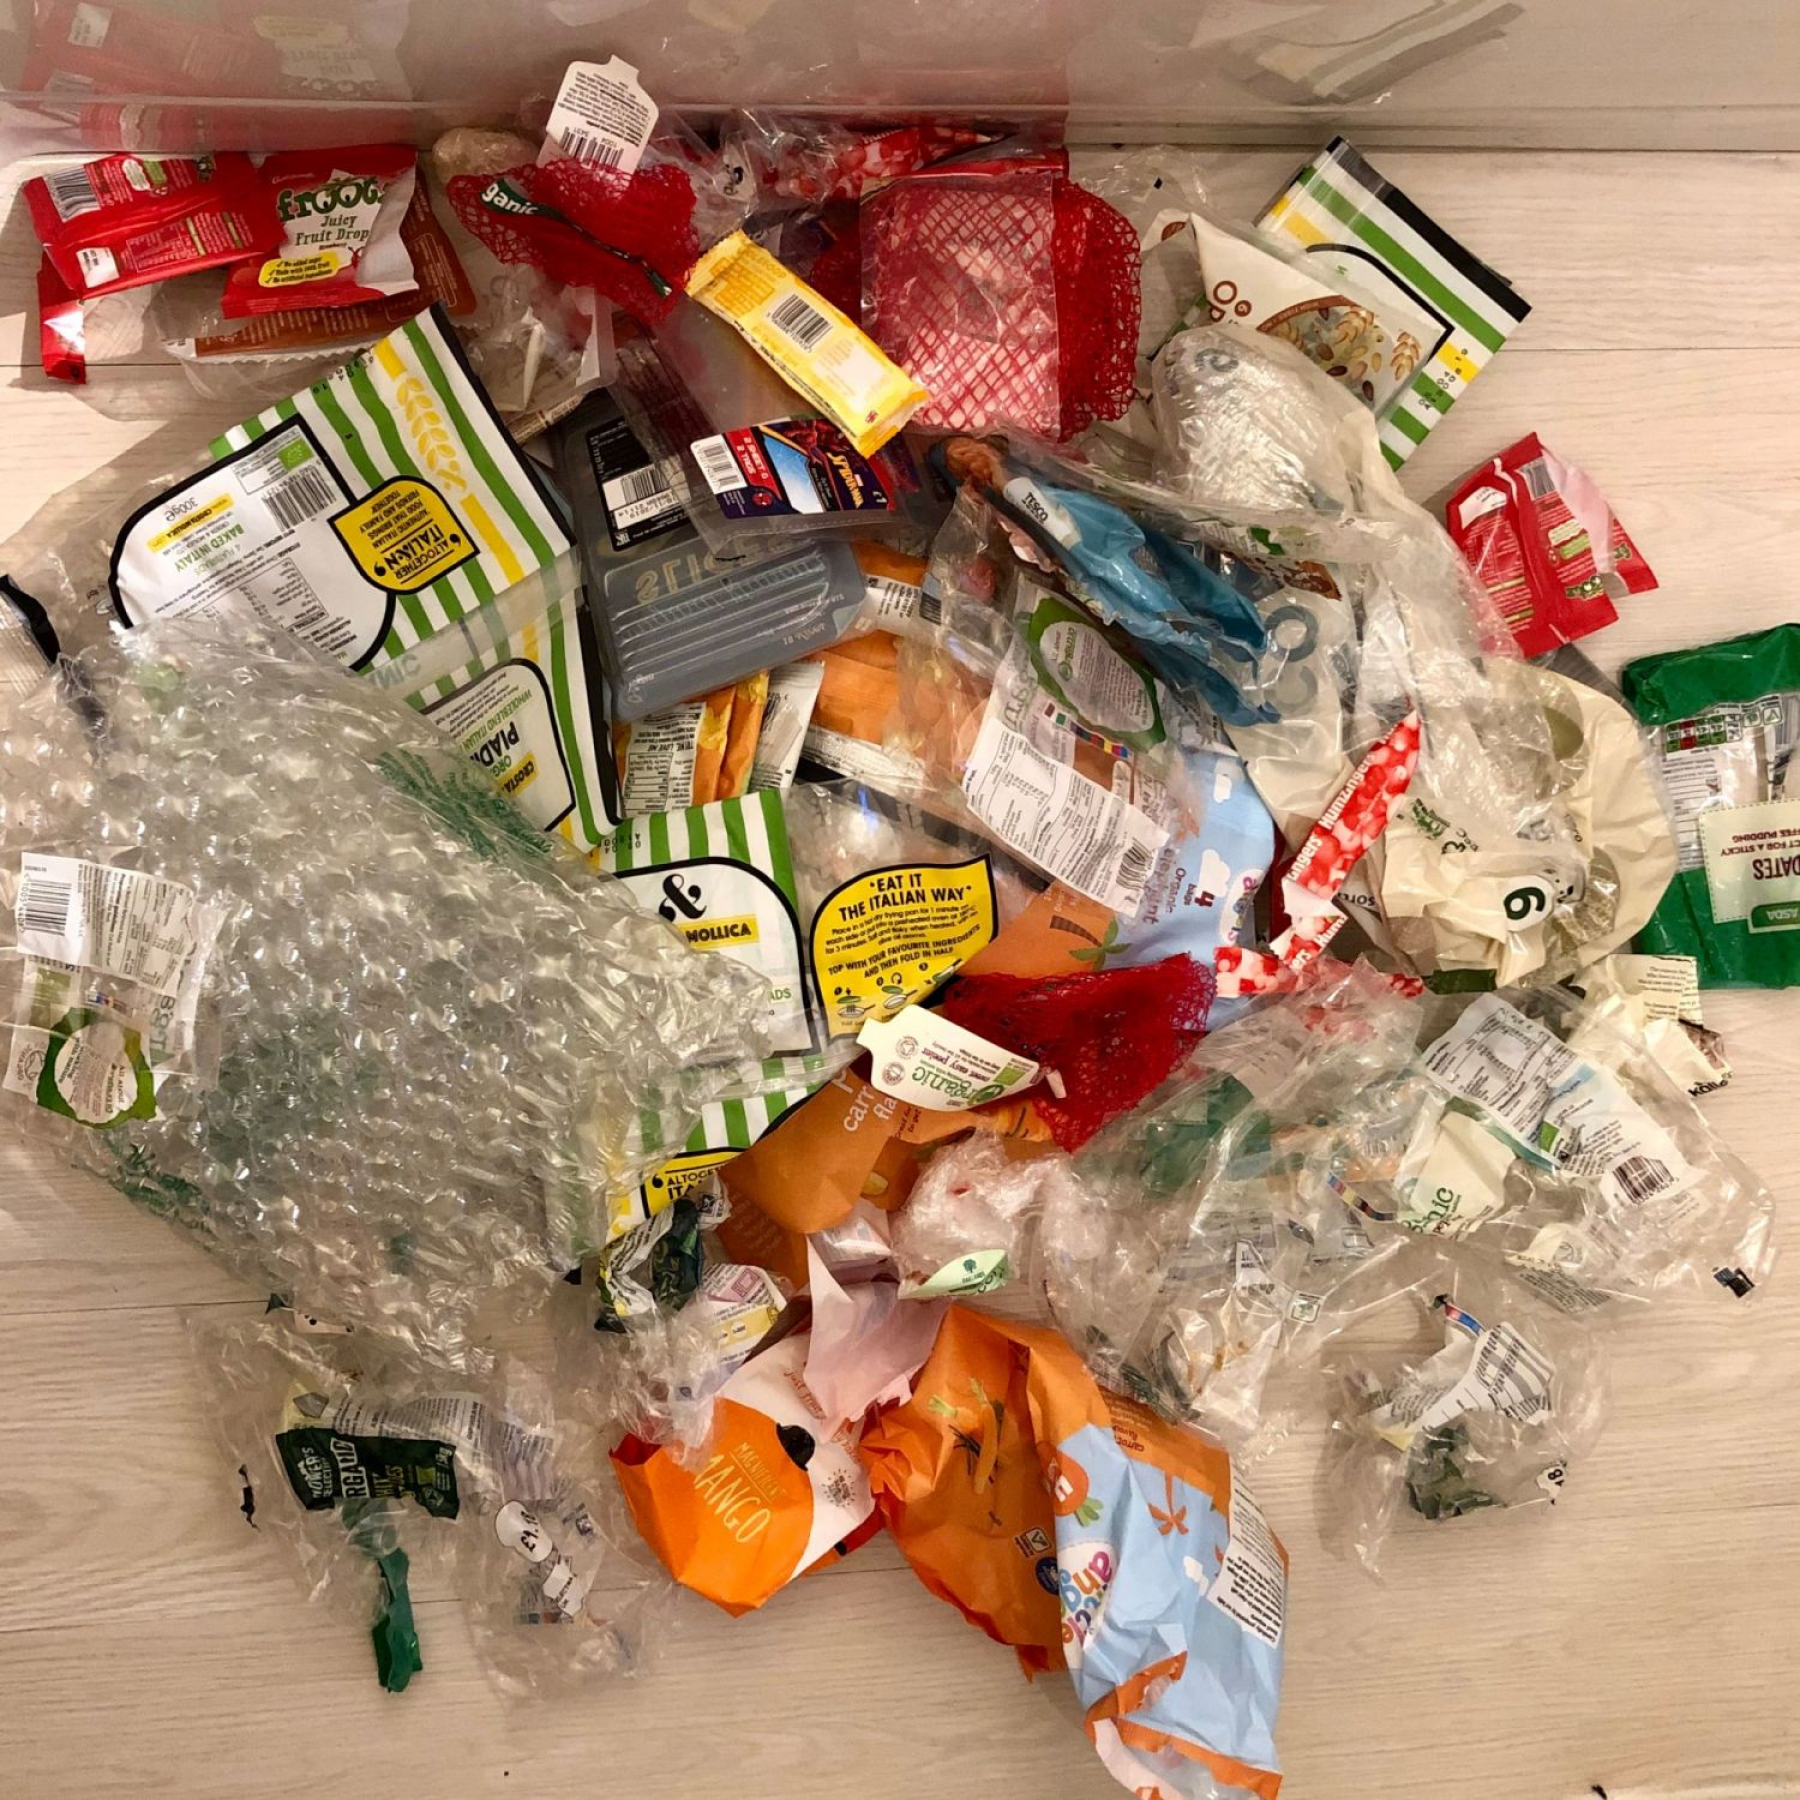 How much plastic do you use in a week